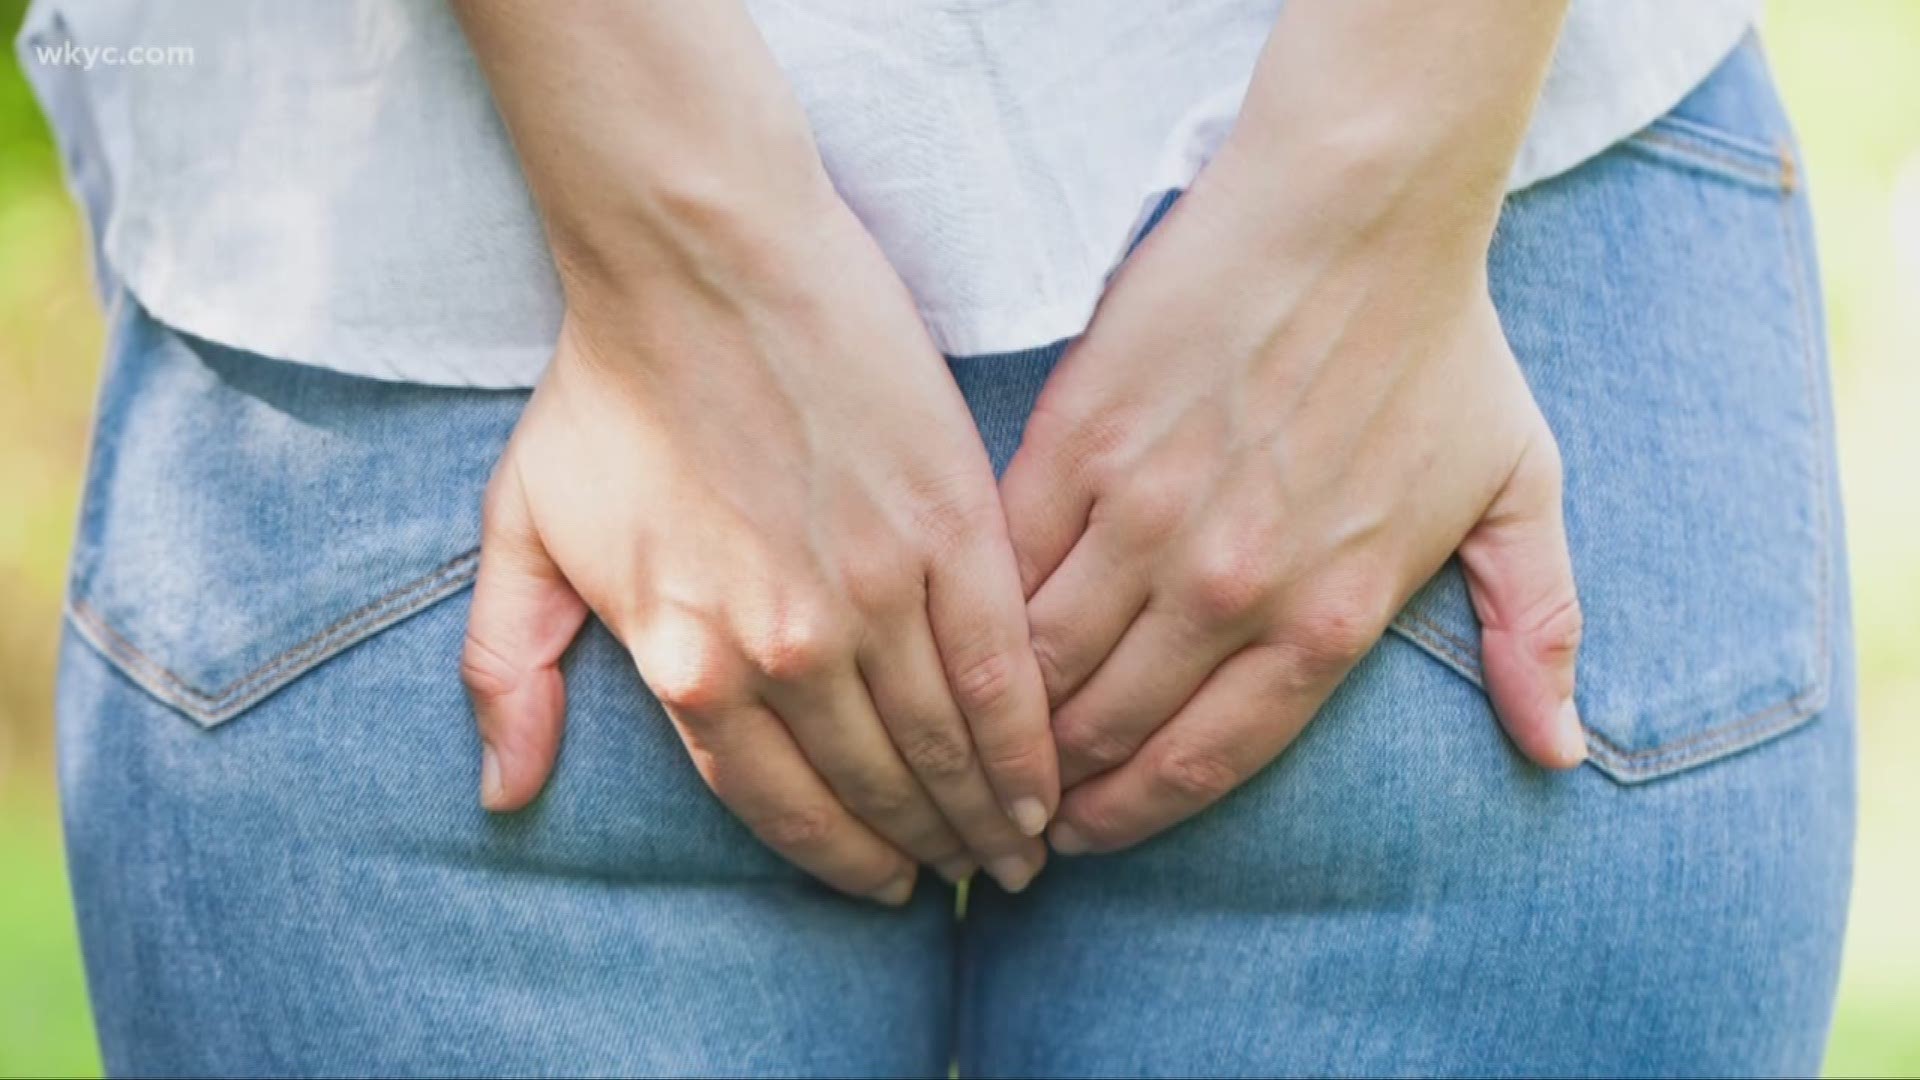 Sept. 18, 2018: A stinky new study explains what happens to your body when trying to hold in flatulence.